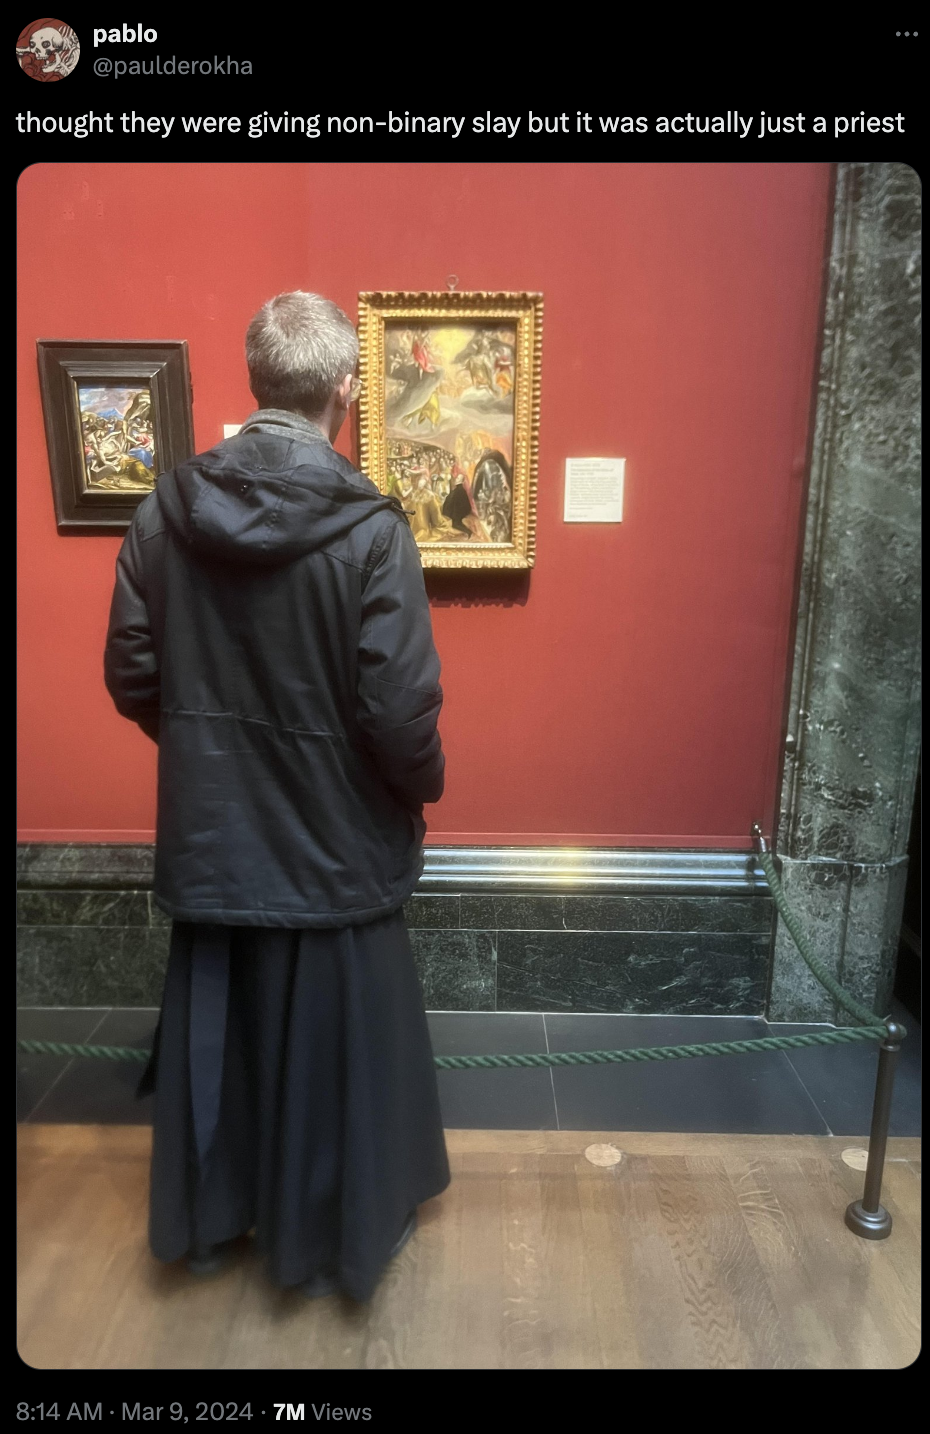 Person in priest attire viewing paintings in a gallery. Text joking about a non-binary look